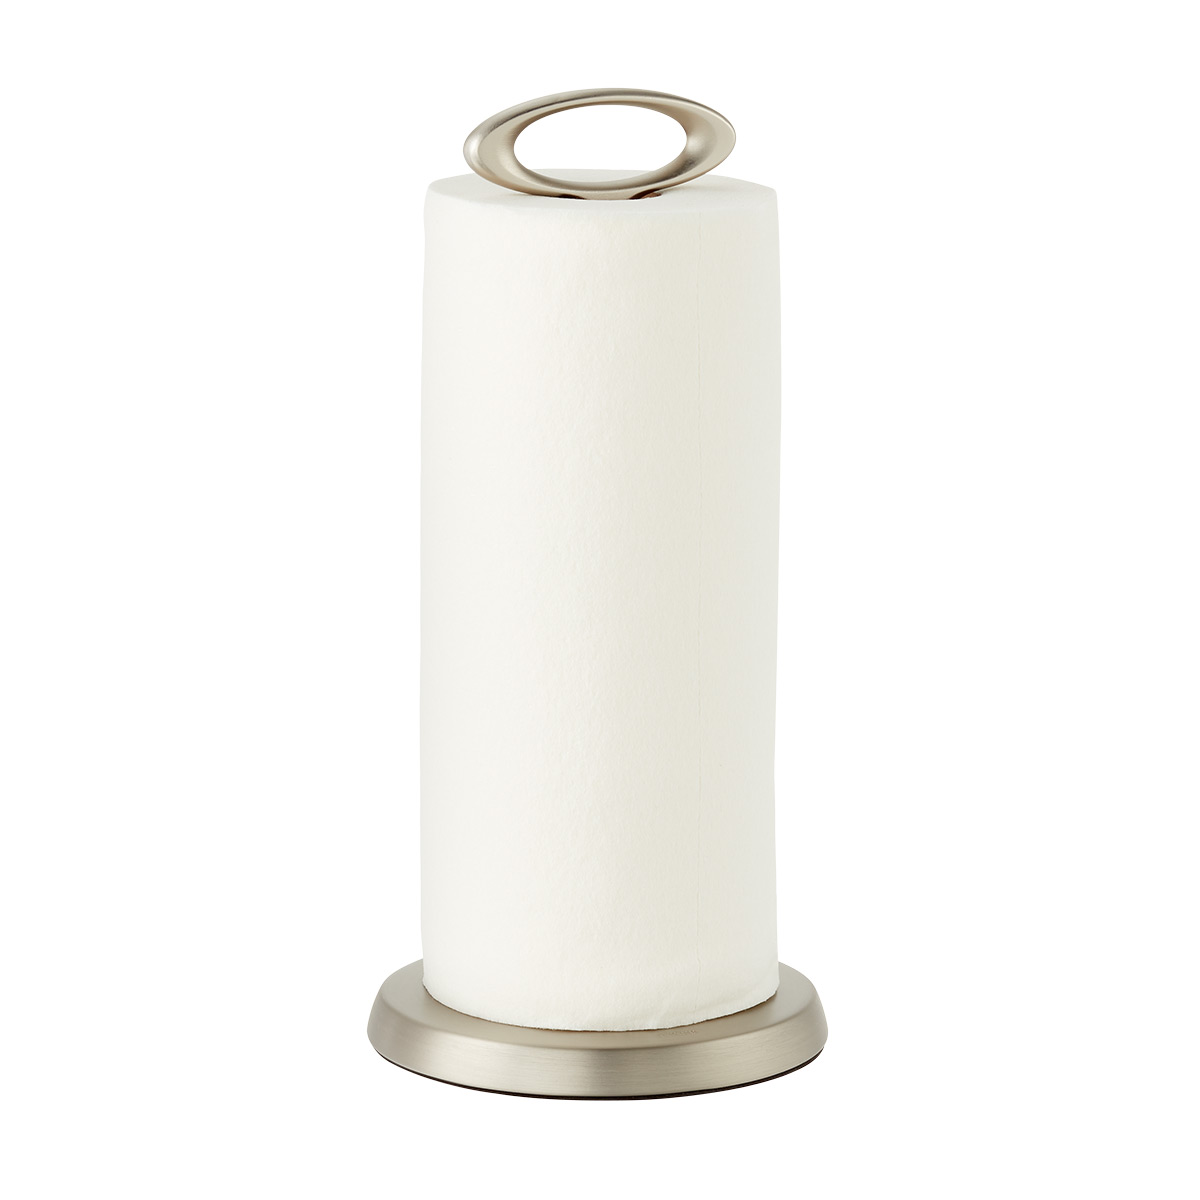 Umbra Grasp Paper Towel Holder | The Container Store